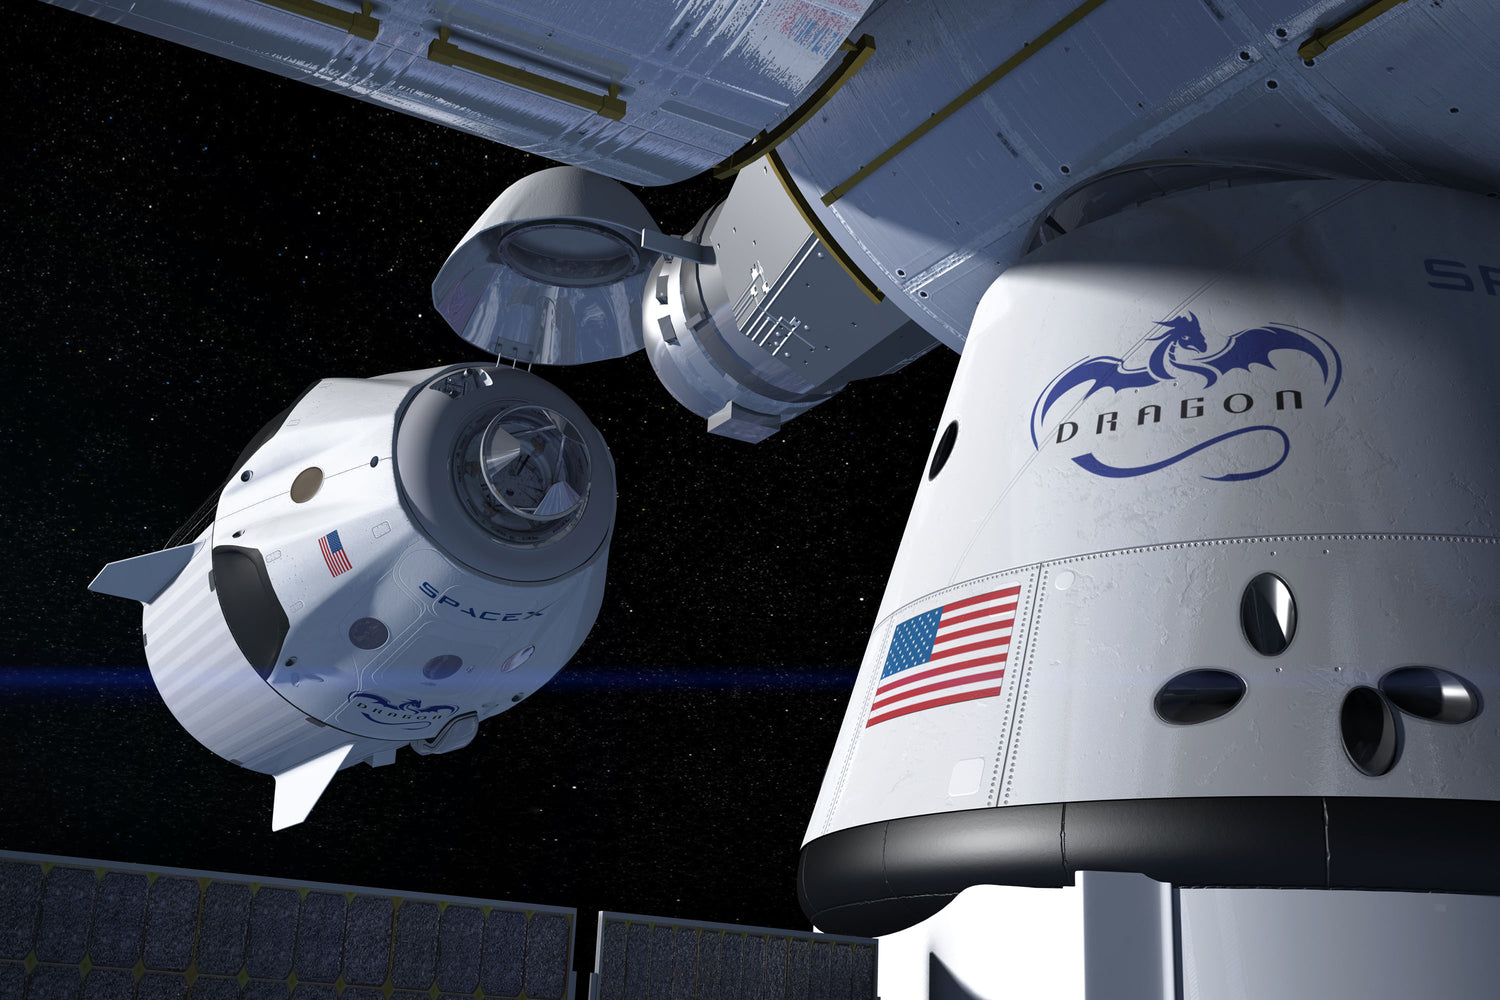 SpaceX will launch NASA astronauts to the International Space Station